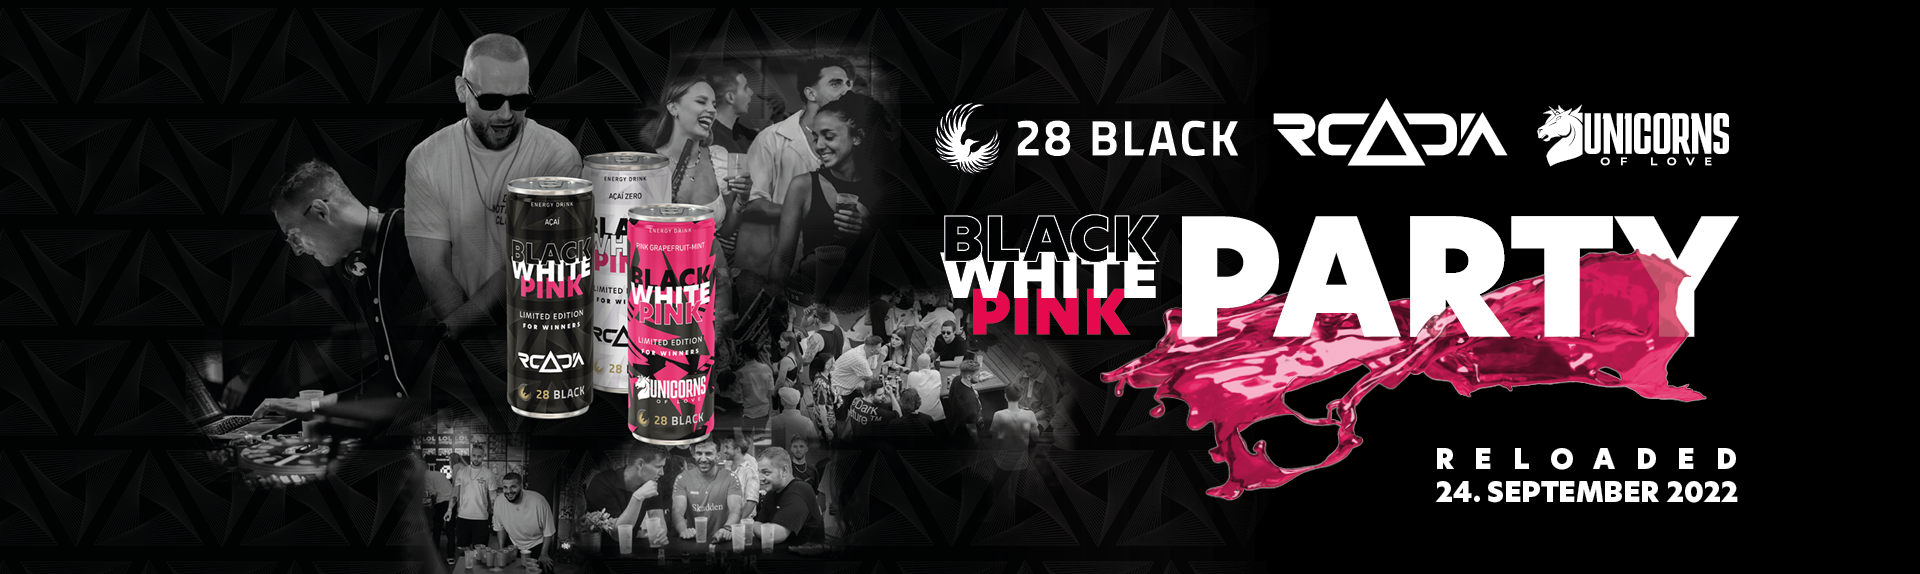 BLACK WHITE PINK PARTY RELOADED